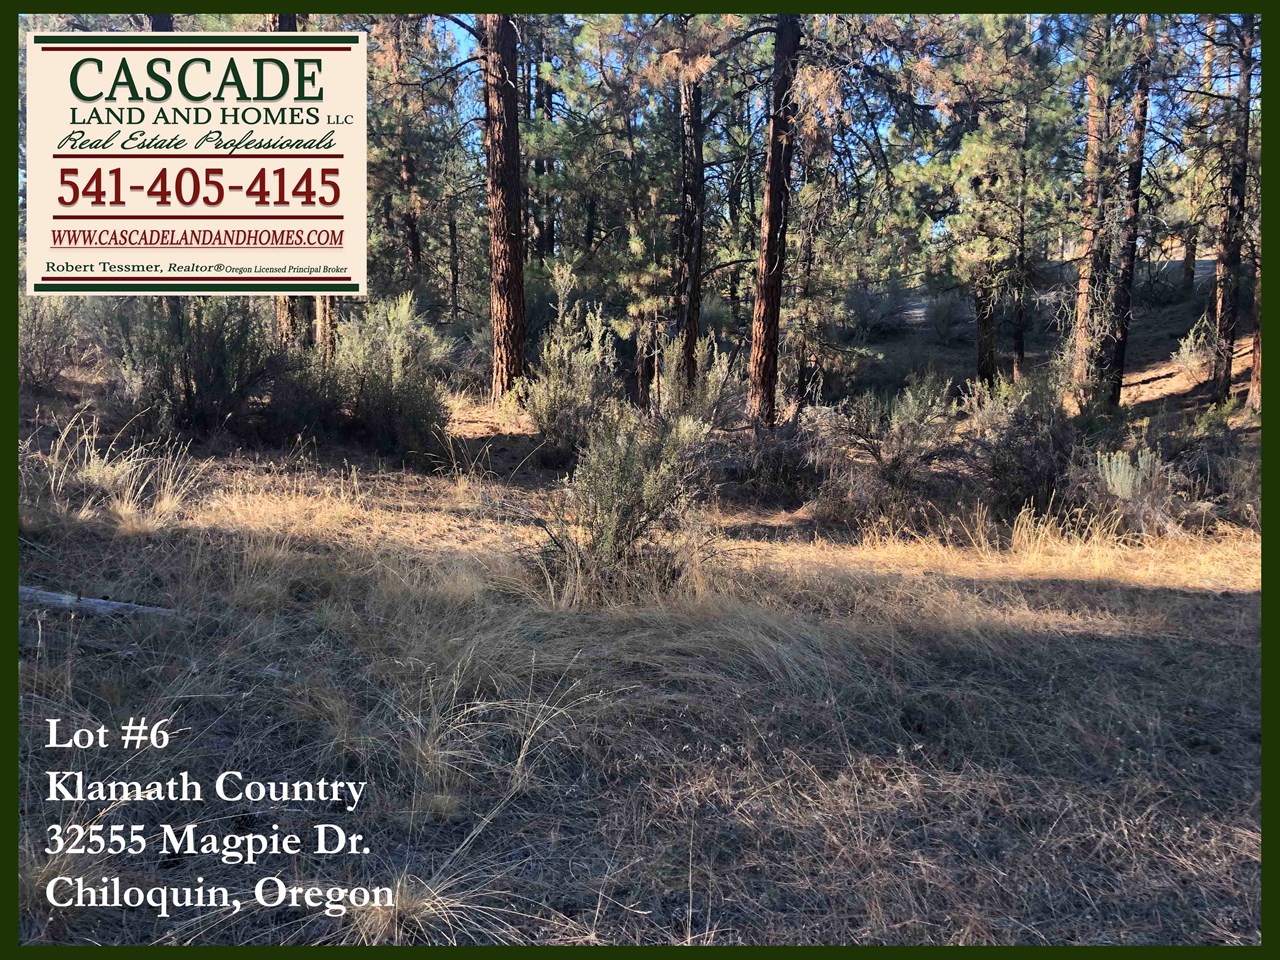 the property slopes gently, but the topography varies. there has been a pad cut in by previous owners for a possible building site. the trees are primarily pines, the understory is sage, and rabbit brush as well as some native grasses, and wildflowers in the spring!